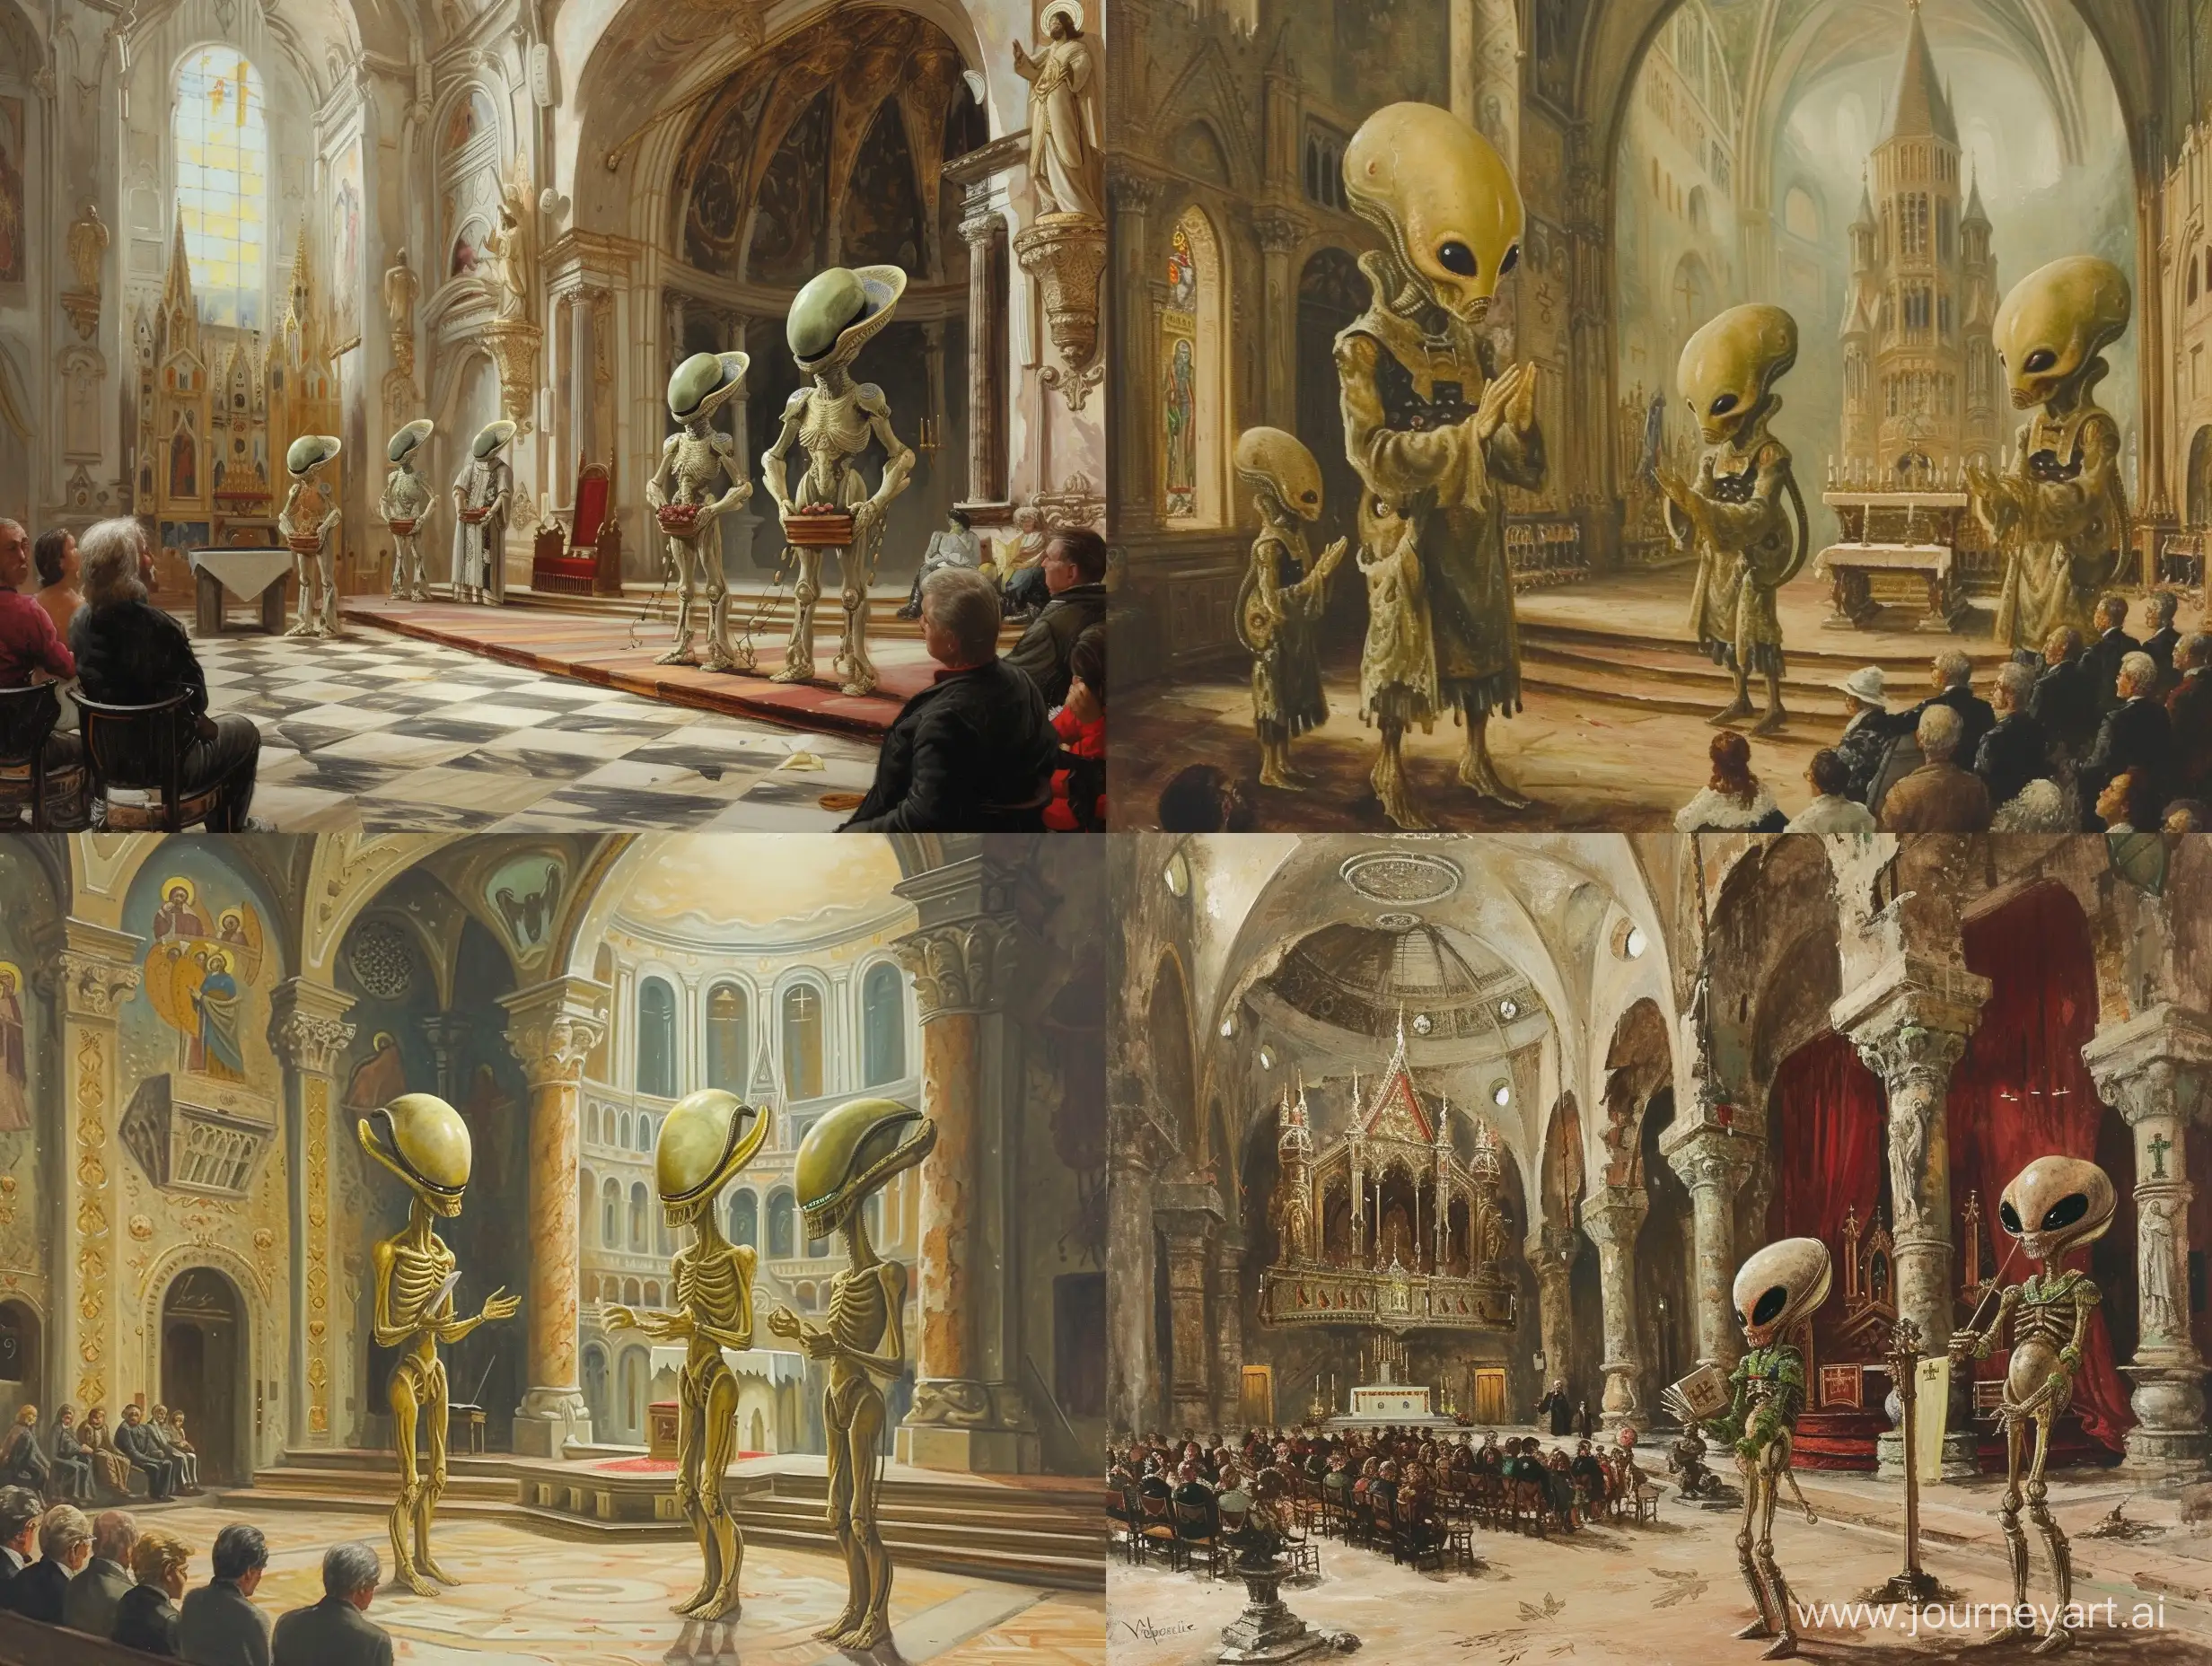 A renaissance painting  in the style of Rafael, depicting extraterrestrials leading a service in an elaborate cathedral, to a small audience.